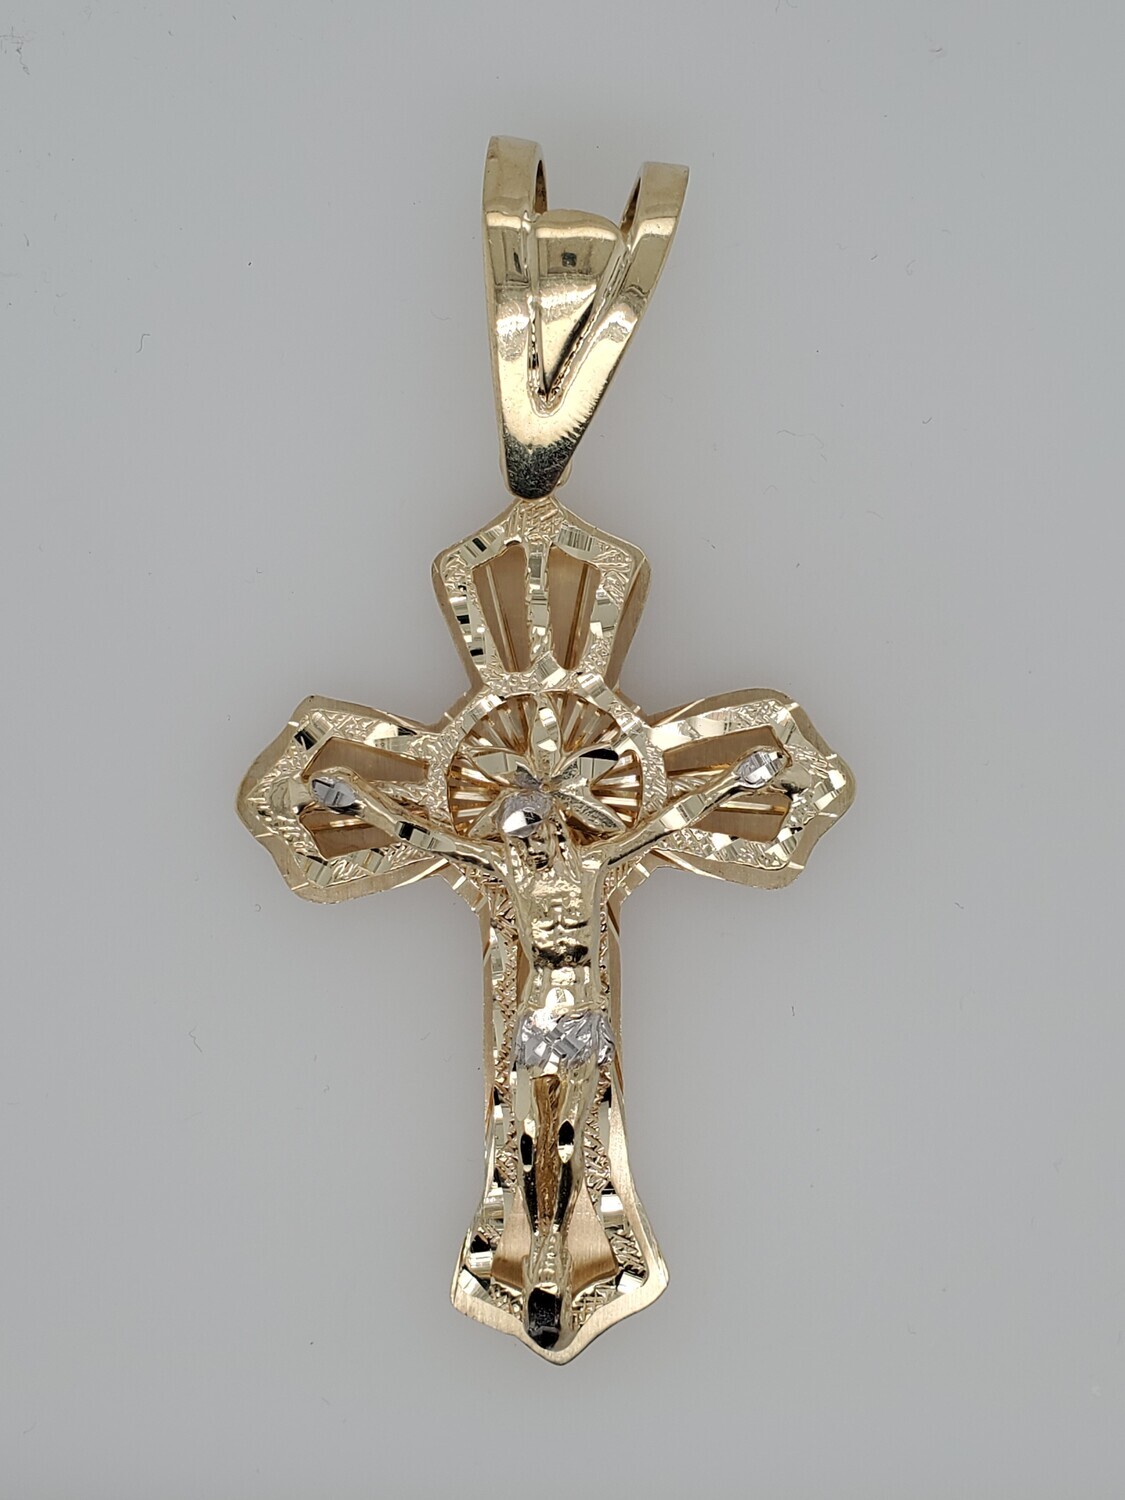 BRAND NEW!! 10k LARGE CRUCIFIX TWO TONE WITH DIAMOND CUT  INVENTORY # I-18291 75TH AVE